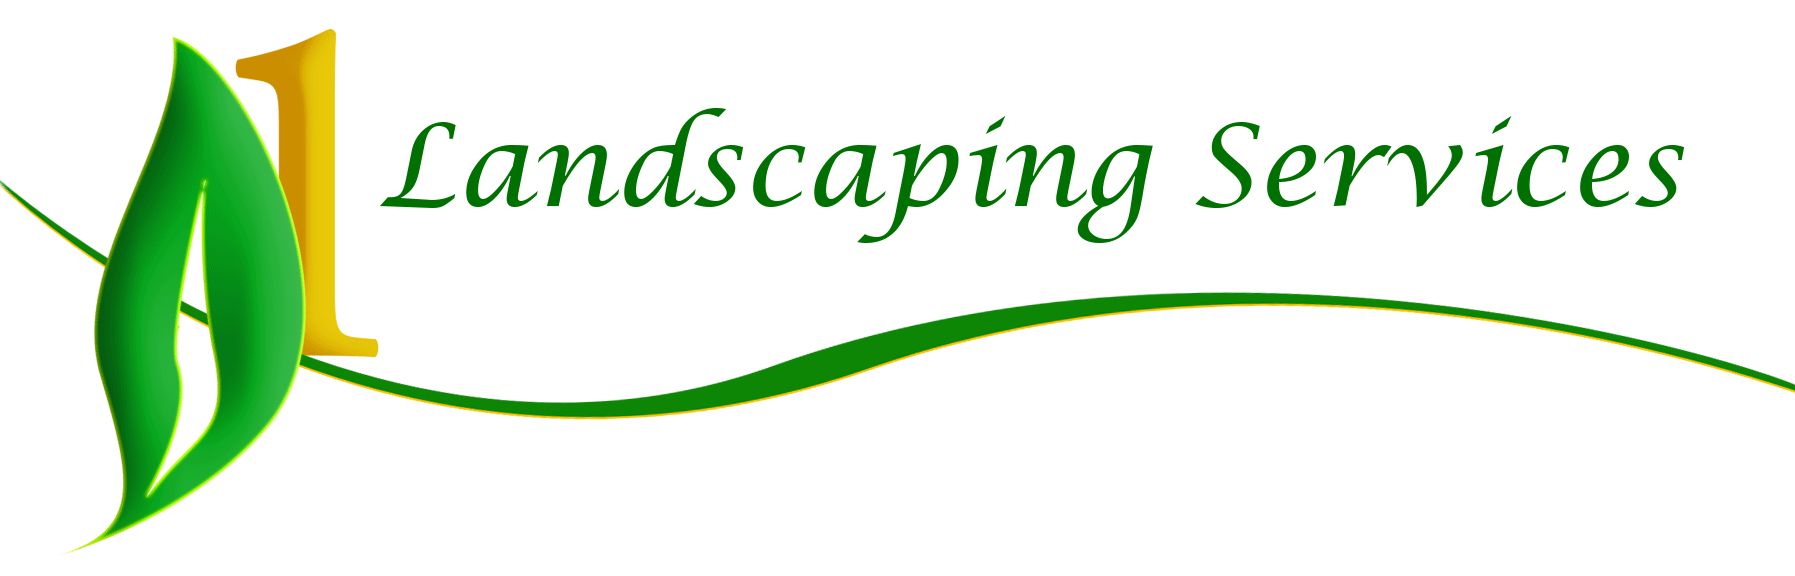 Landscaping Service Logo - Landscaping services